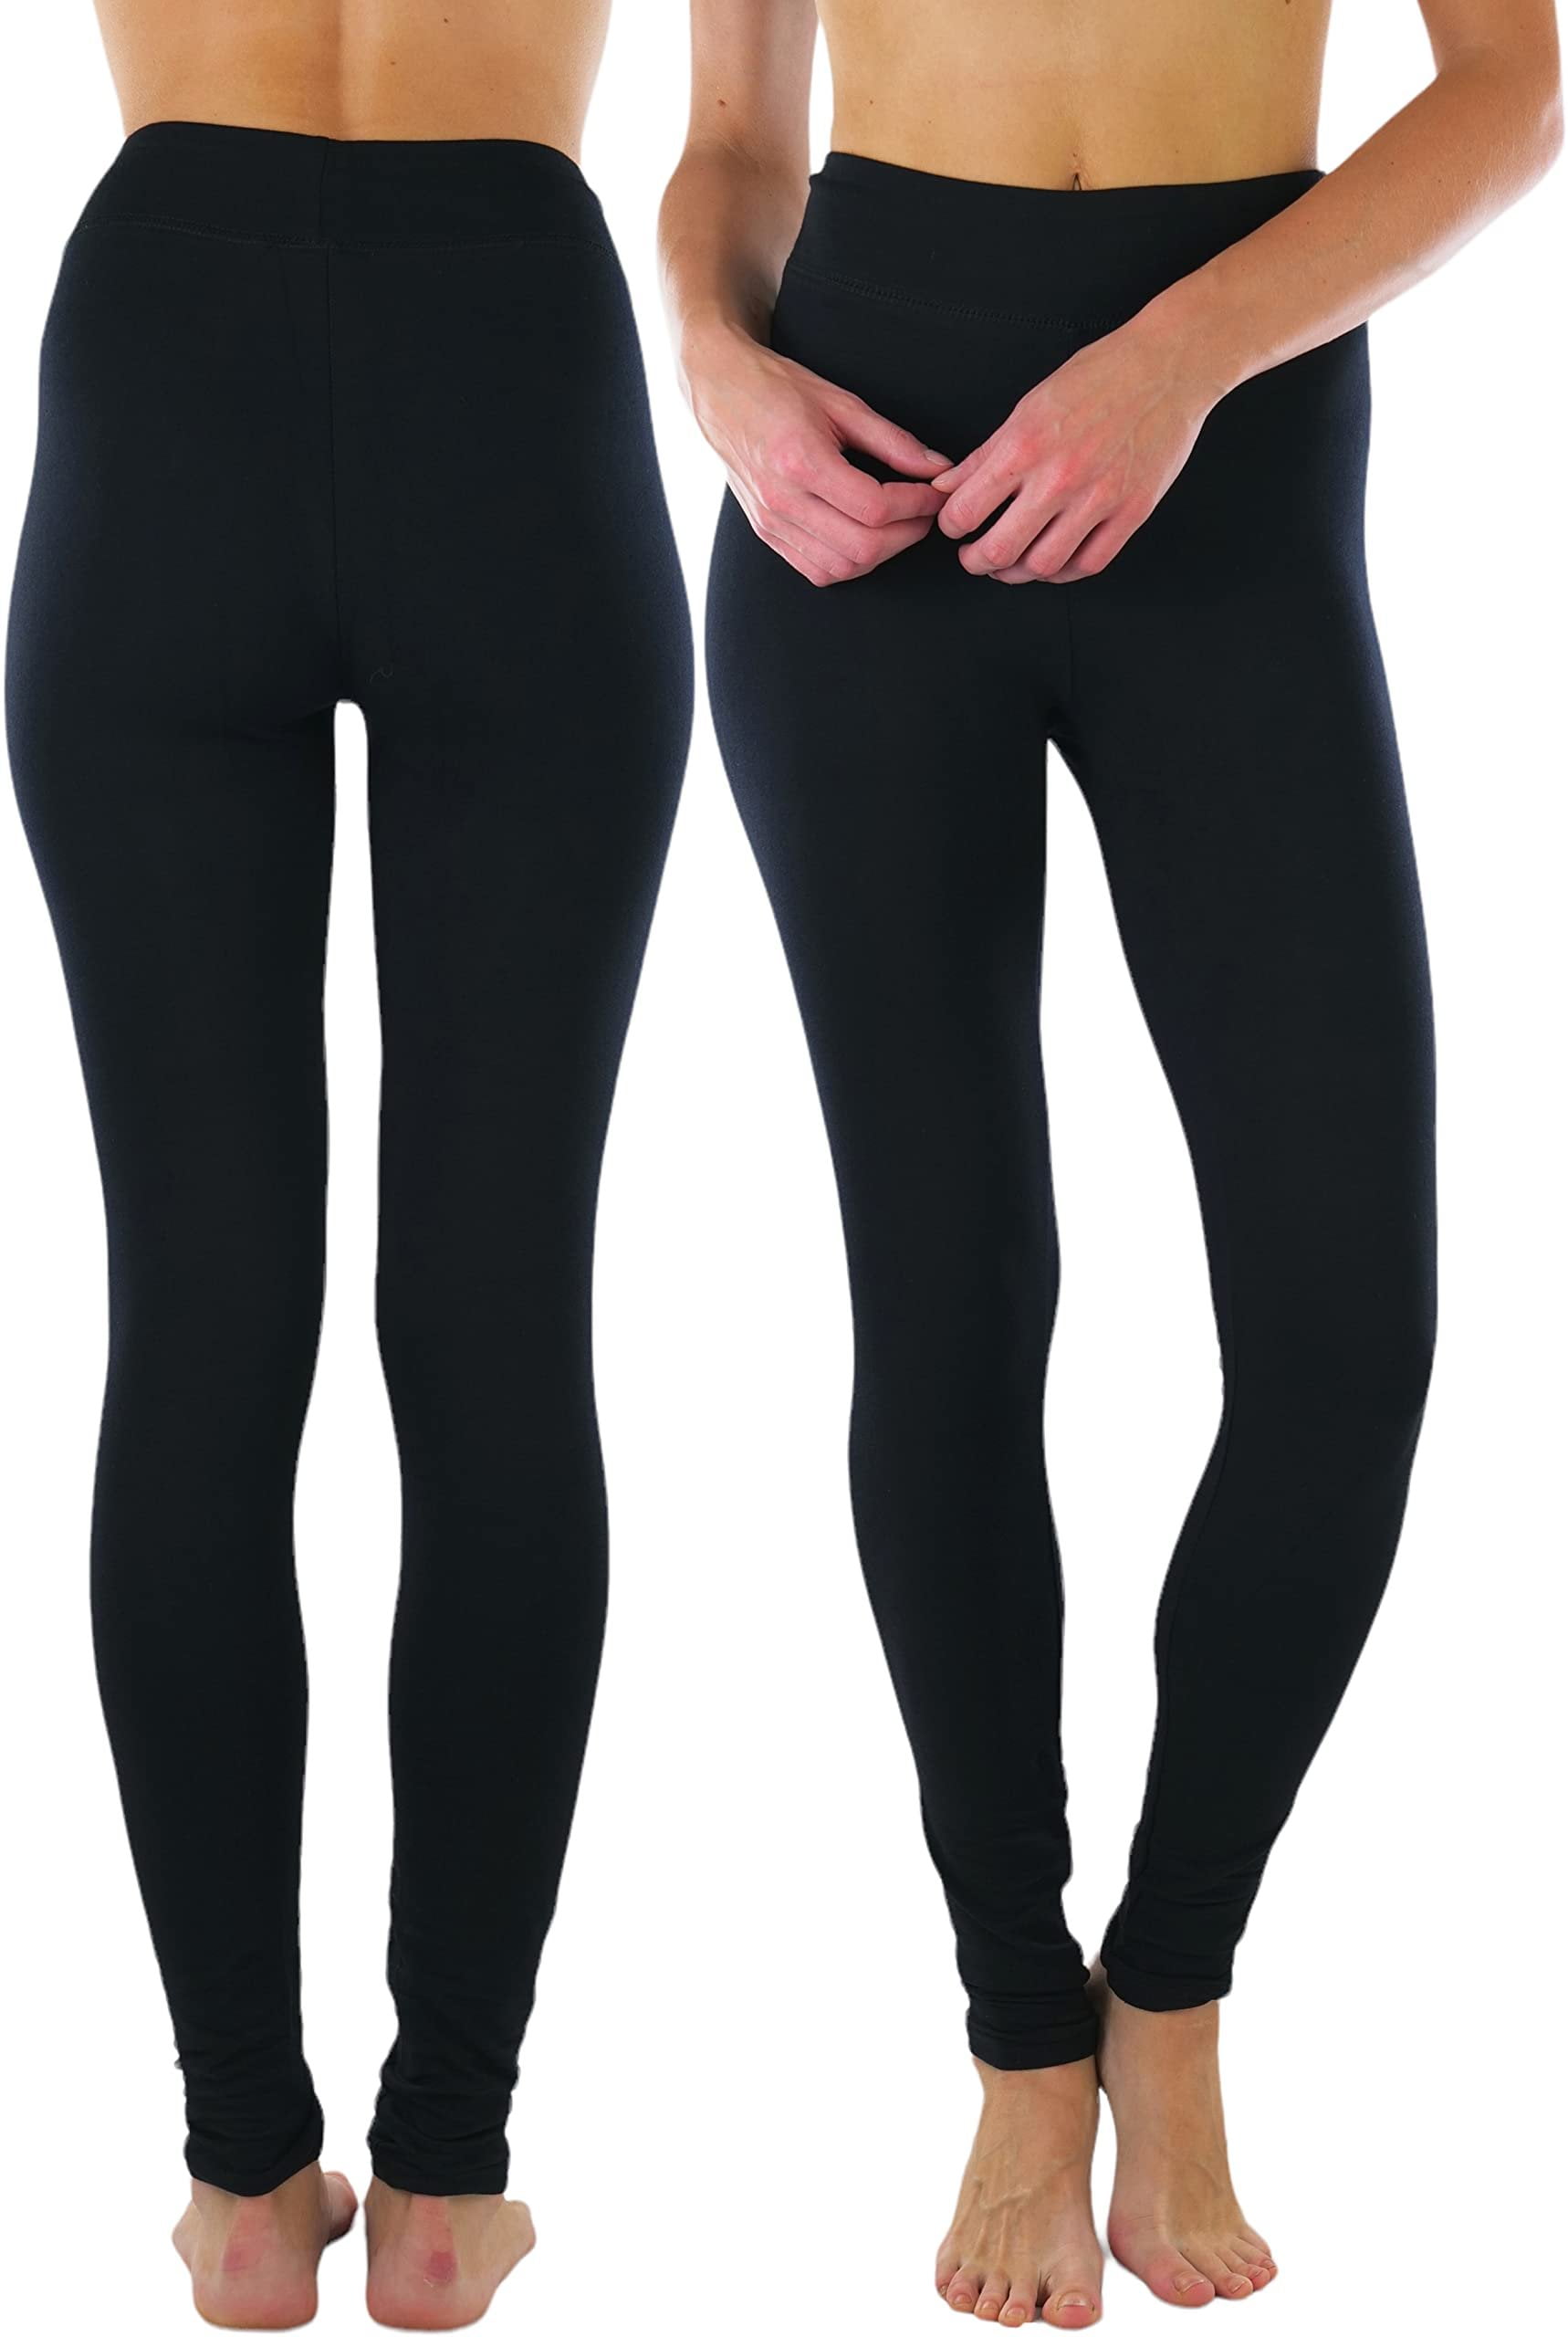 ToBeInStyle Women's Medium Weight Classic Breathable Cotton Legging - Black  - Small